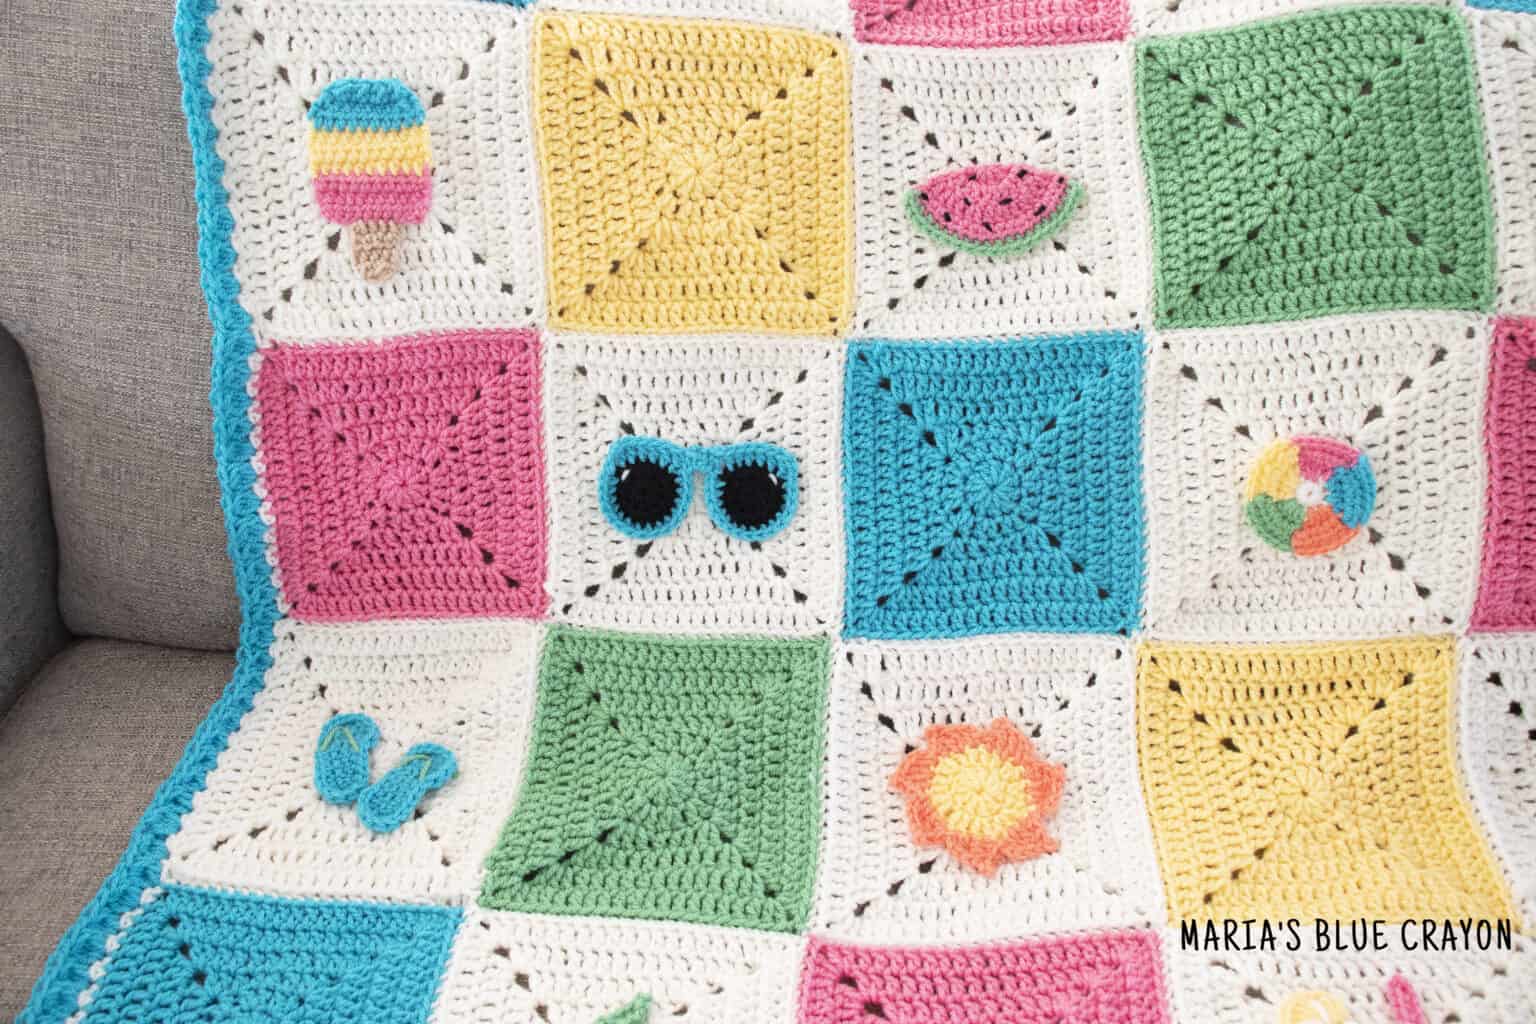 Crochet Summer Themed Granny Square Blanket Pattern - Maria's Blue Crayon